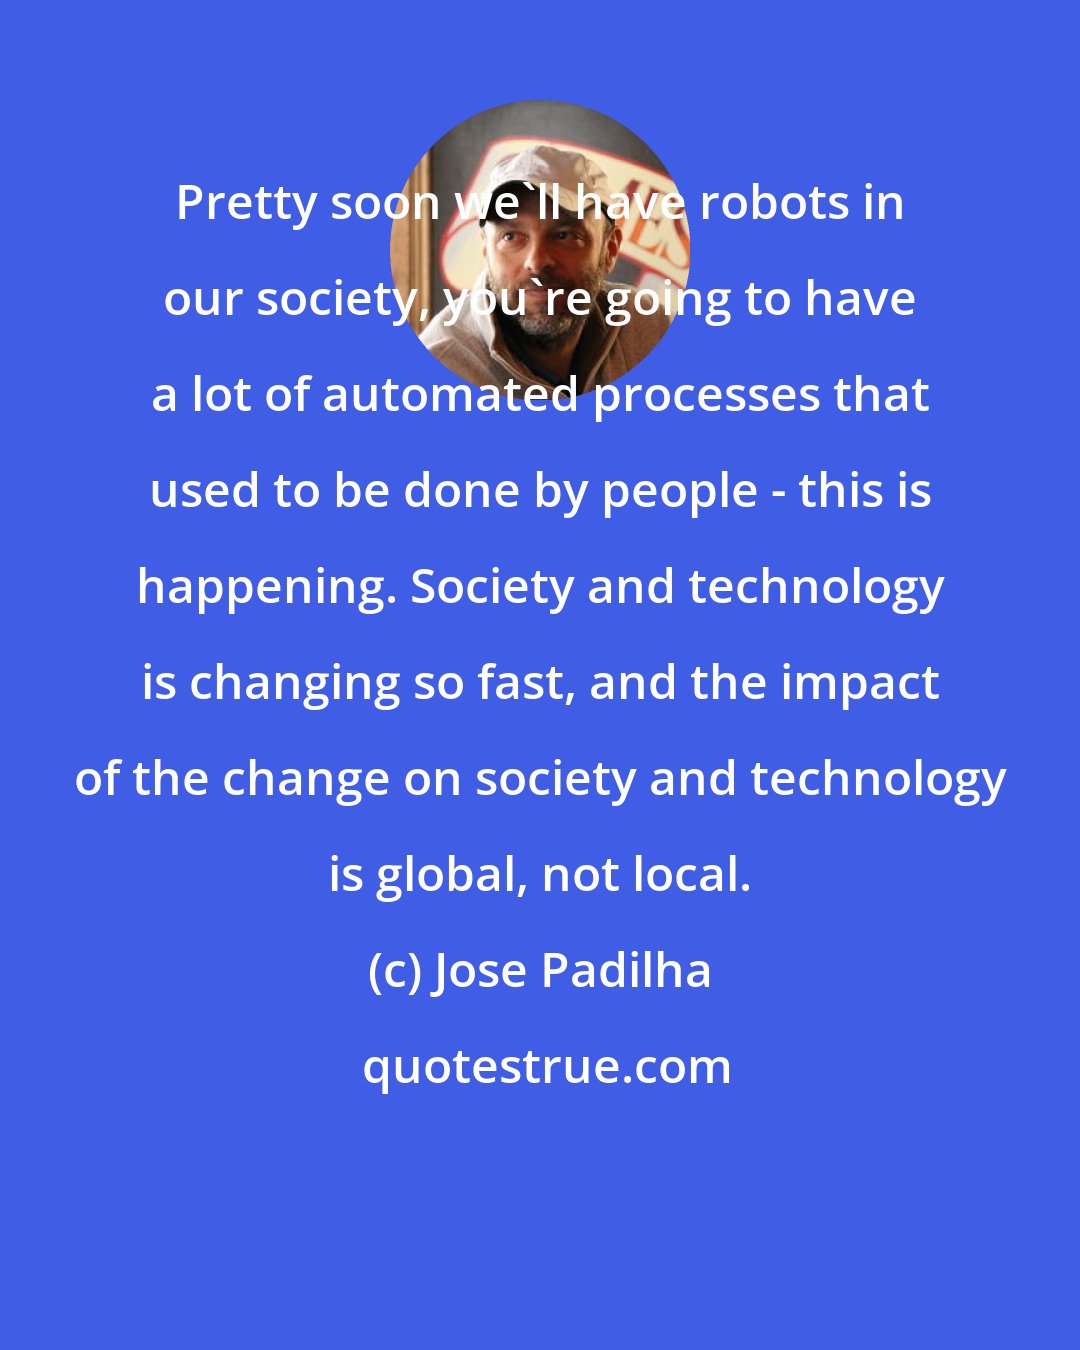 Jose Padilha: Pretty soon we'll have robots in our society, you're going to have a lot of automated processes that used to be done by people - this is happening. Society and technology is changing so fast, and the impact of the change on society and technology is global, not local.